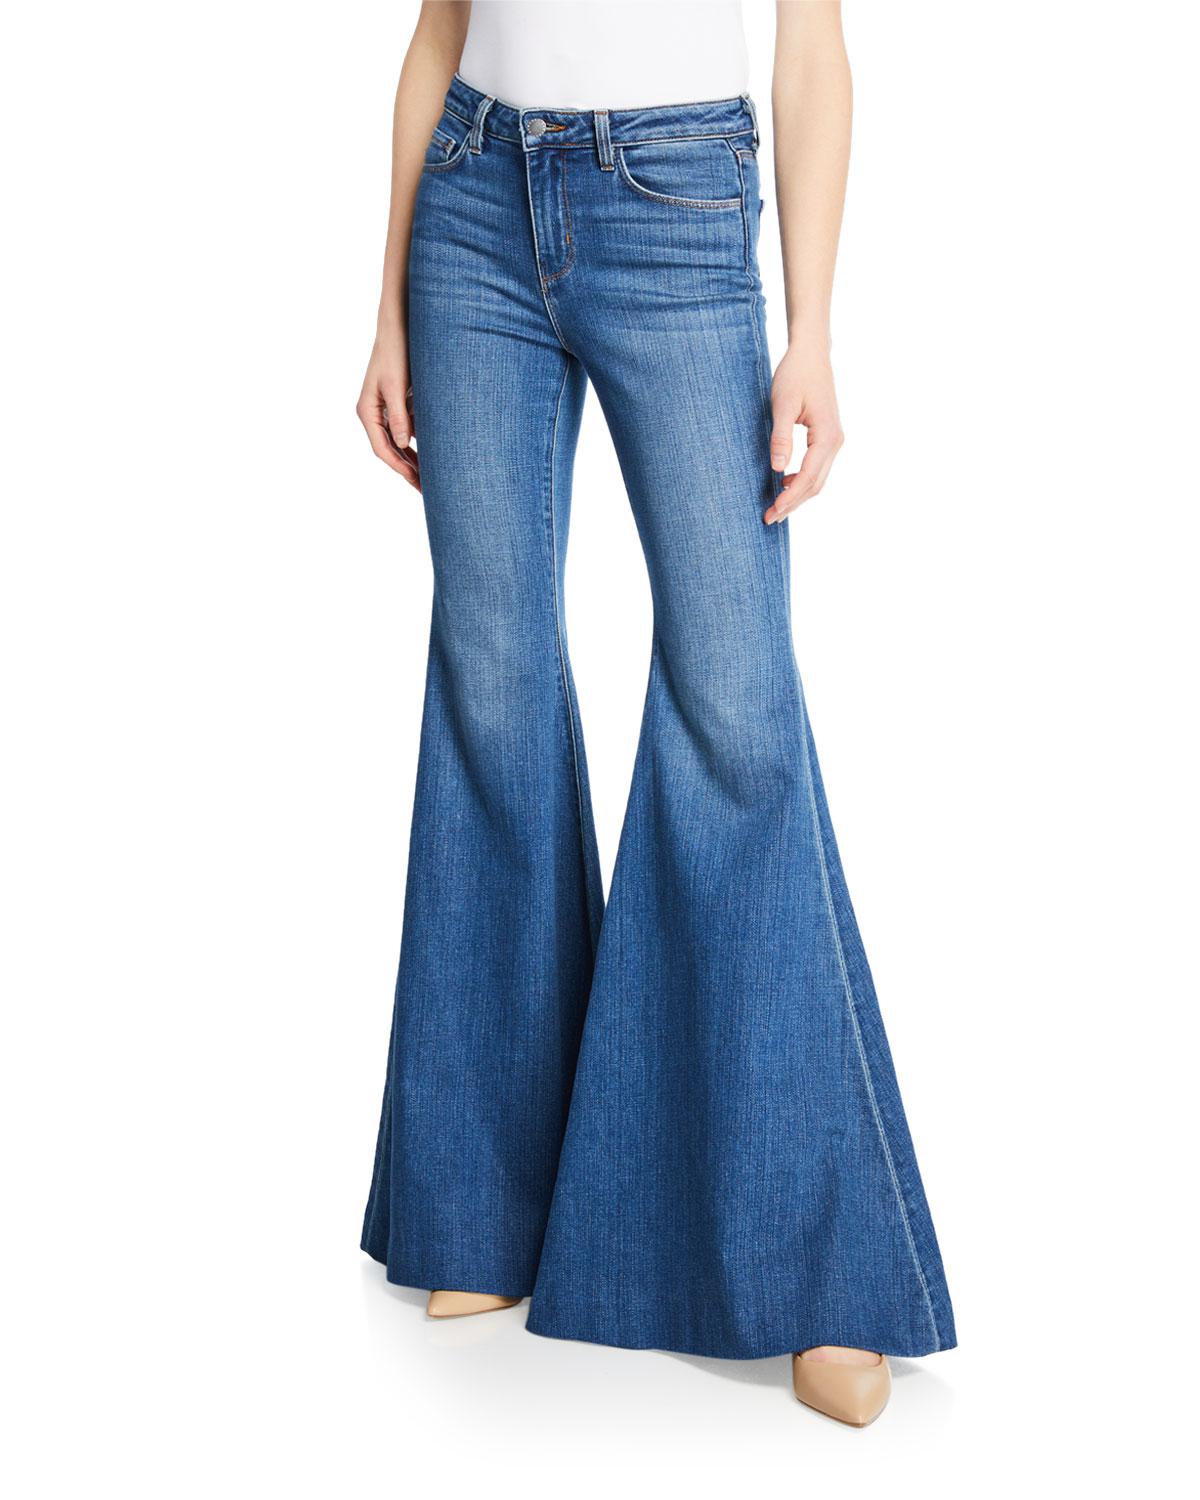 L'Agence Lorde High-rise Super Flare Jeans in Blue - Lyst